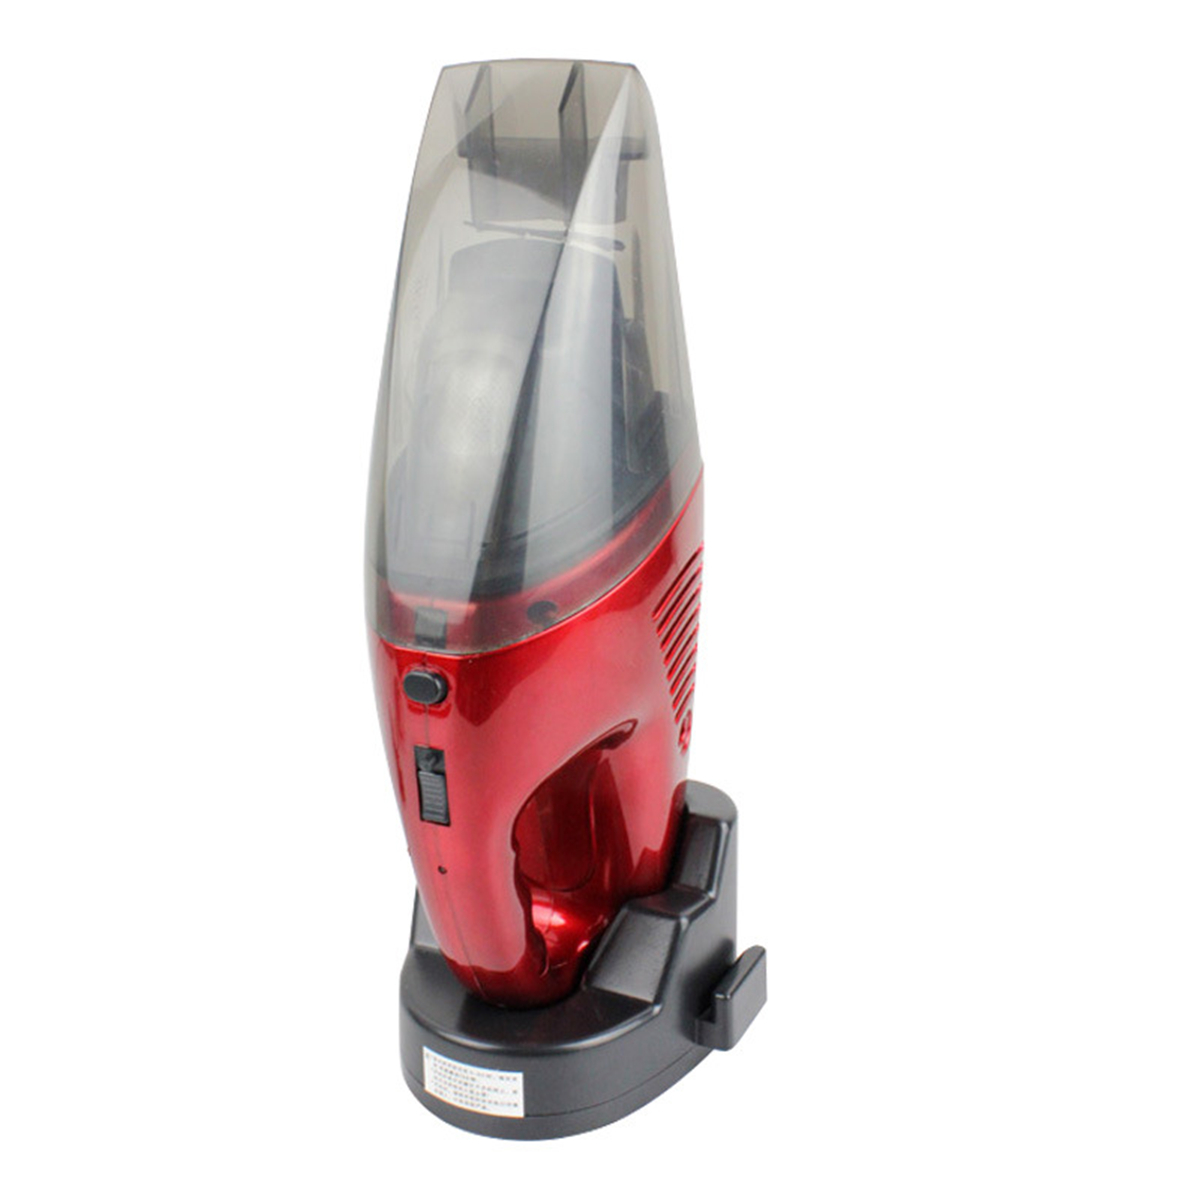 

60W Wet And Dry Car Wireless Home Rechargeable Handheld Vacuum Cleaner